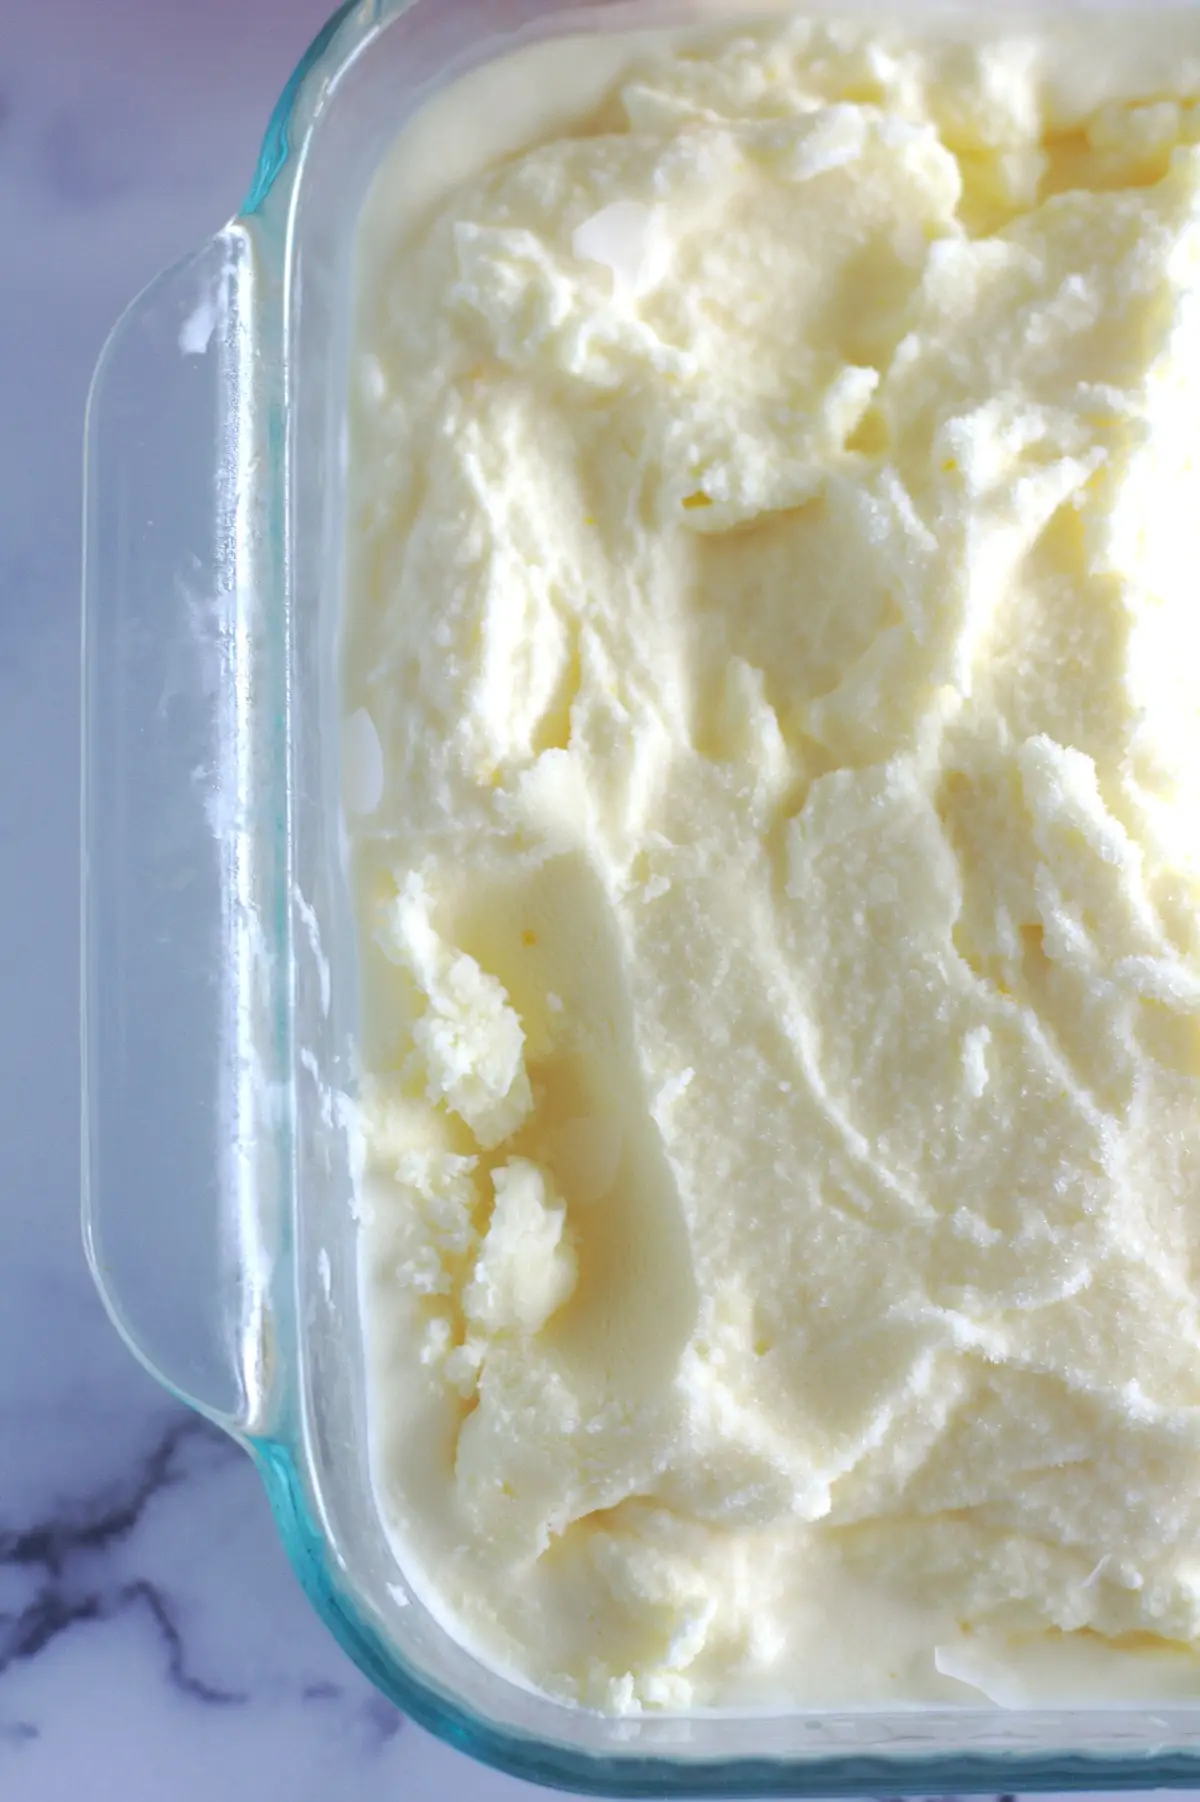 An above view of sherbet in a container.